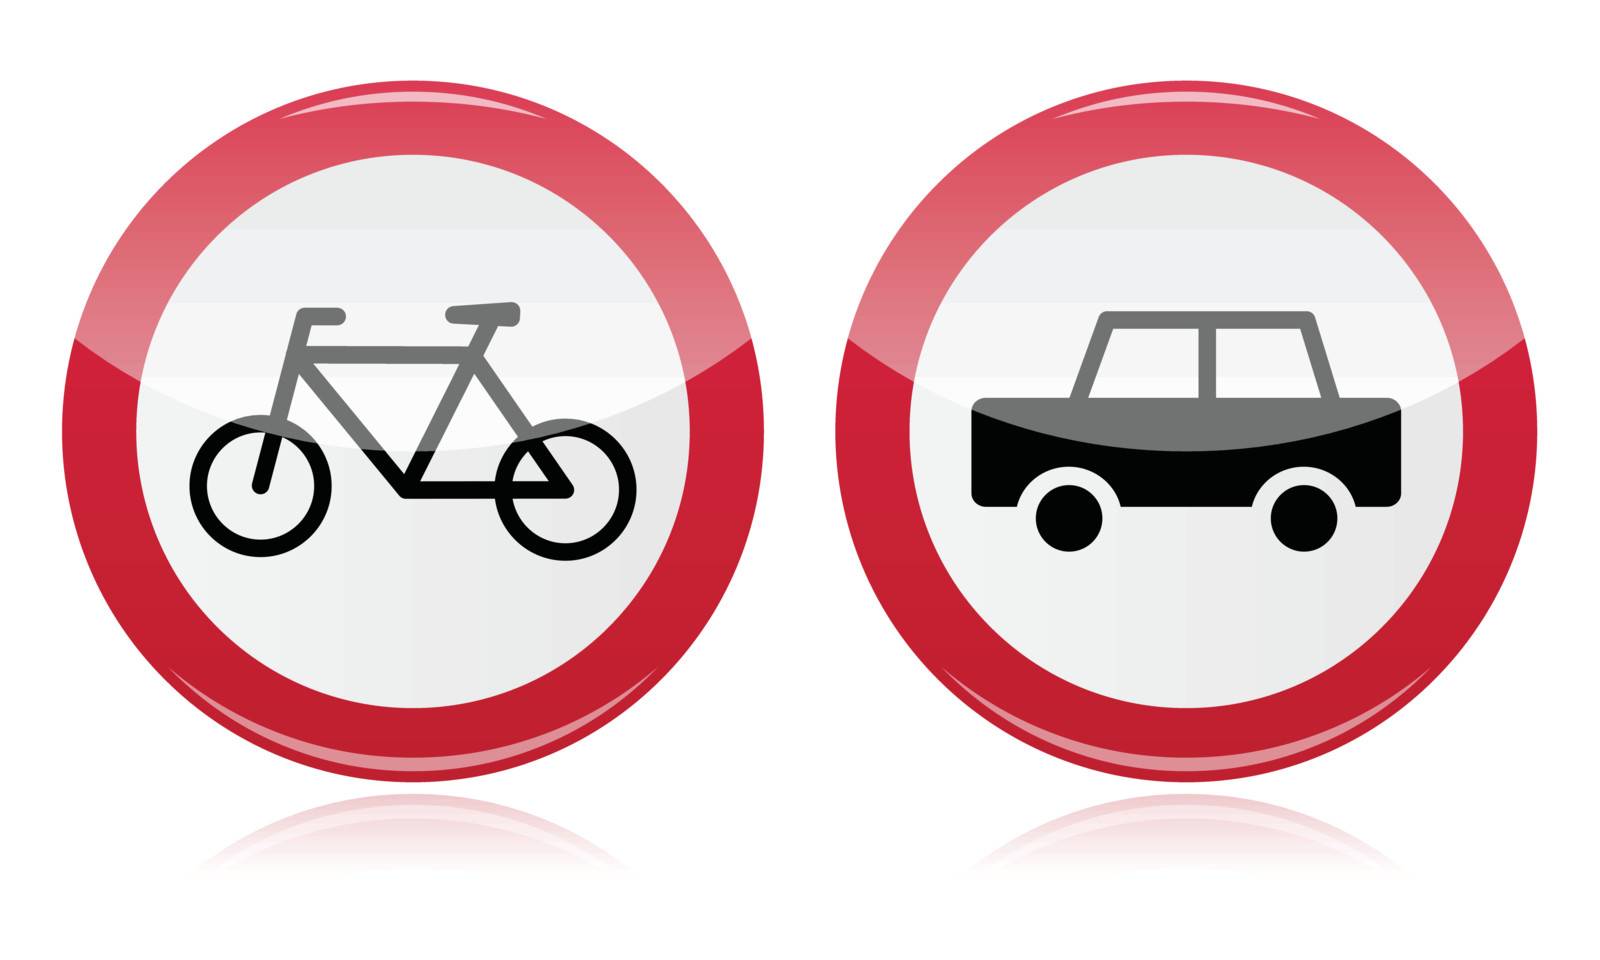 Red circle road sign with auto and bike icons. Caution, warning signs.